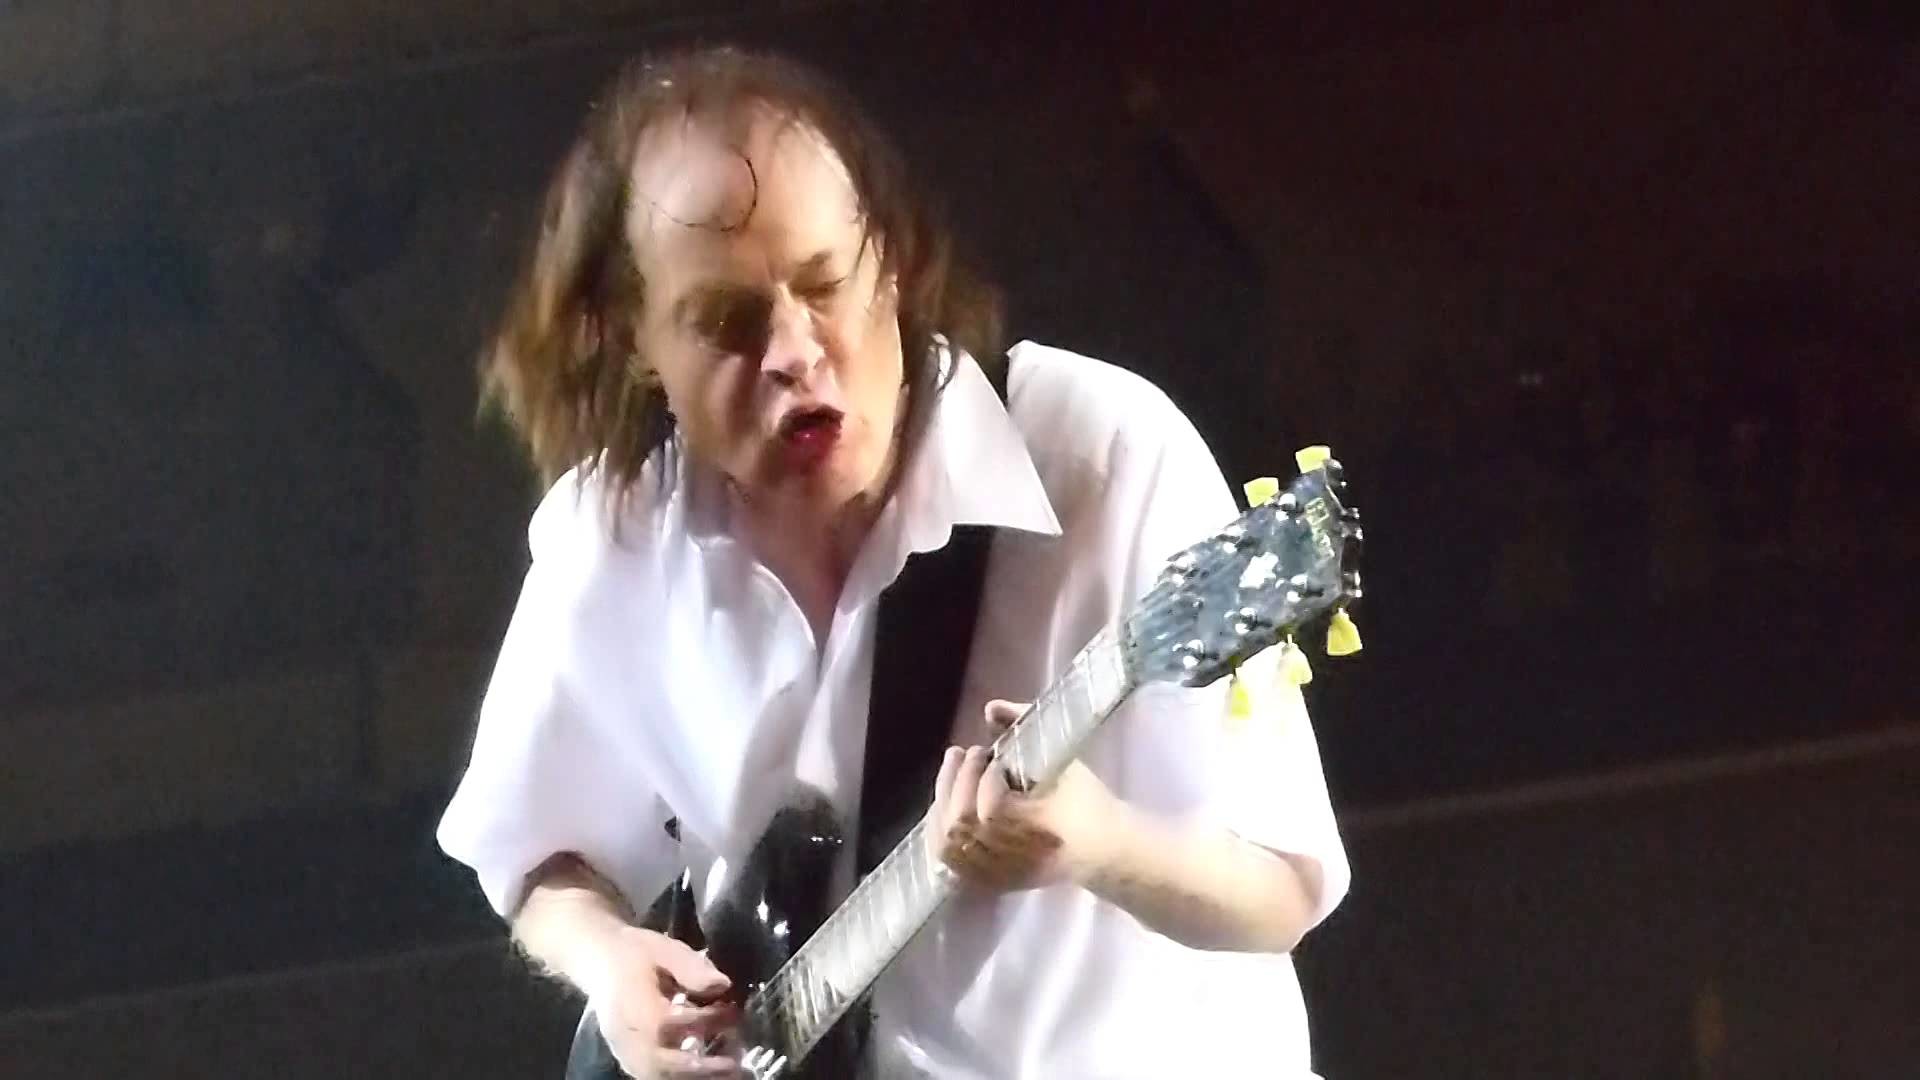 1920x1080 AC/DC, Chicago, 2/17/16, Angus Young guitar solo, part 1